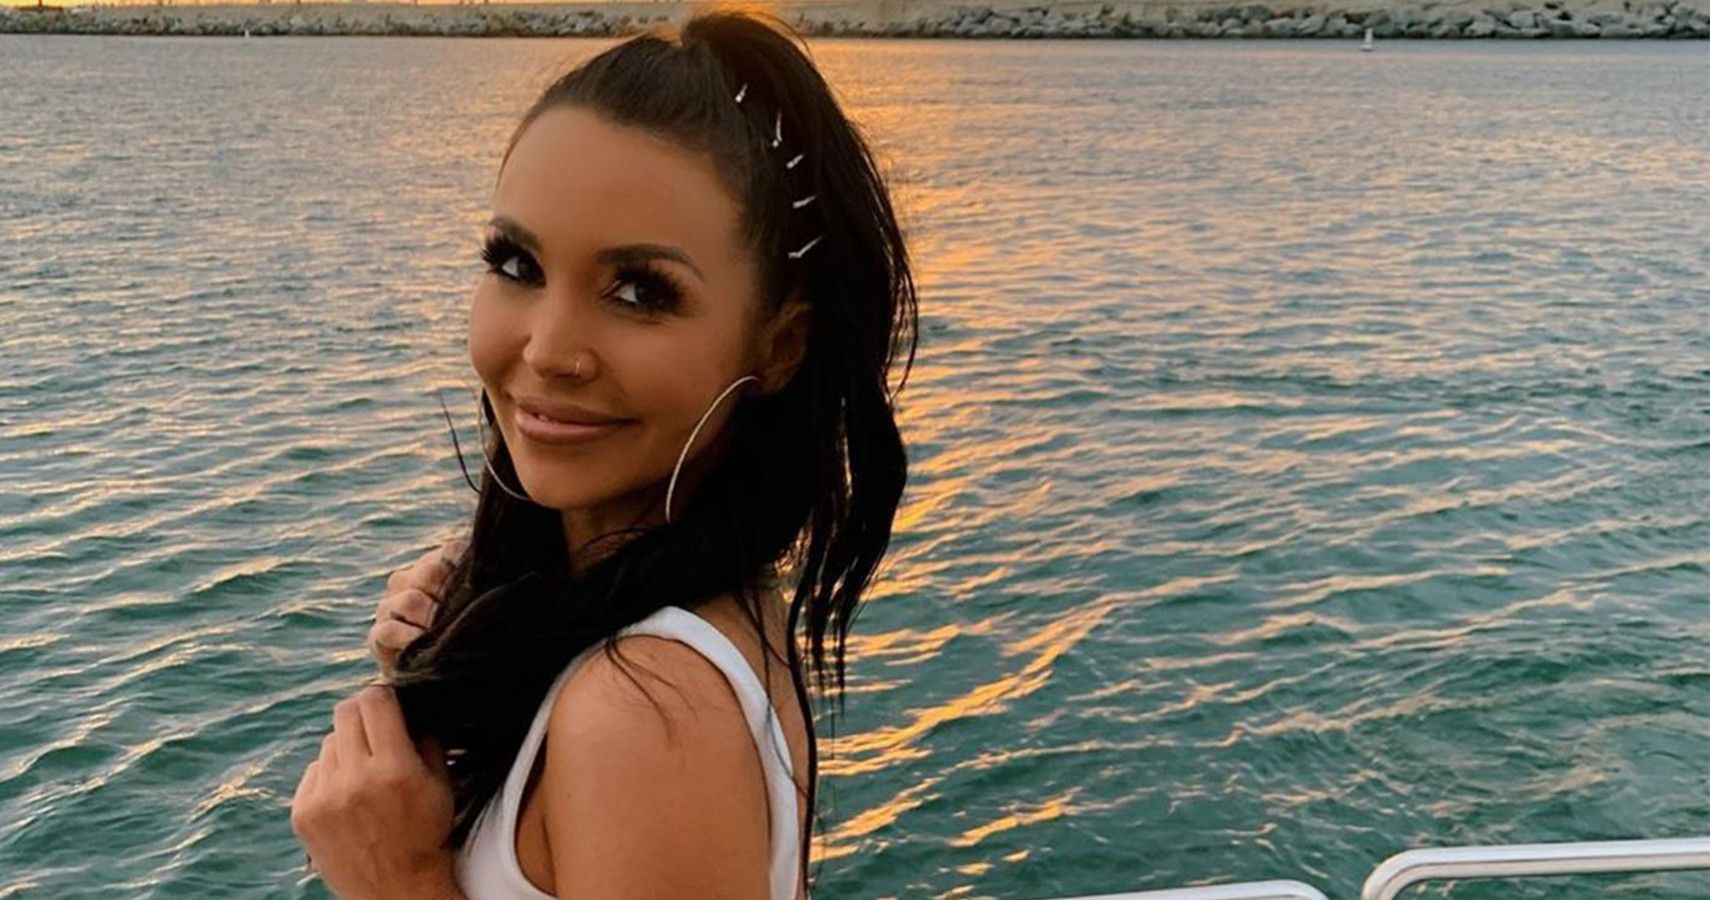 scheana shay is expecting baby after recent miscarriage